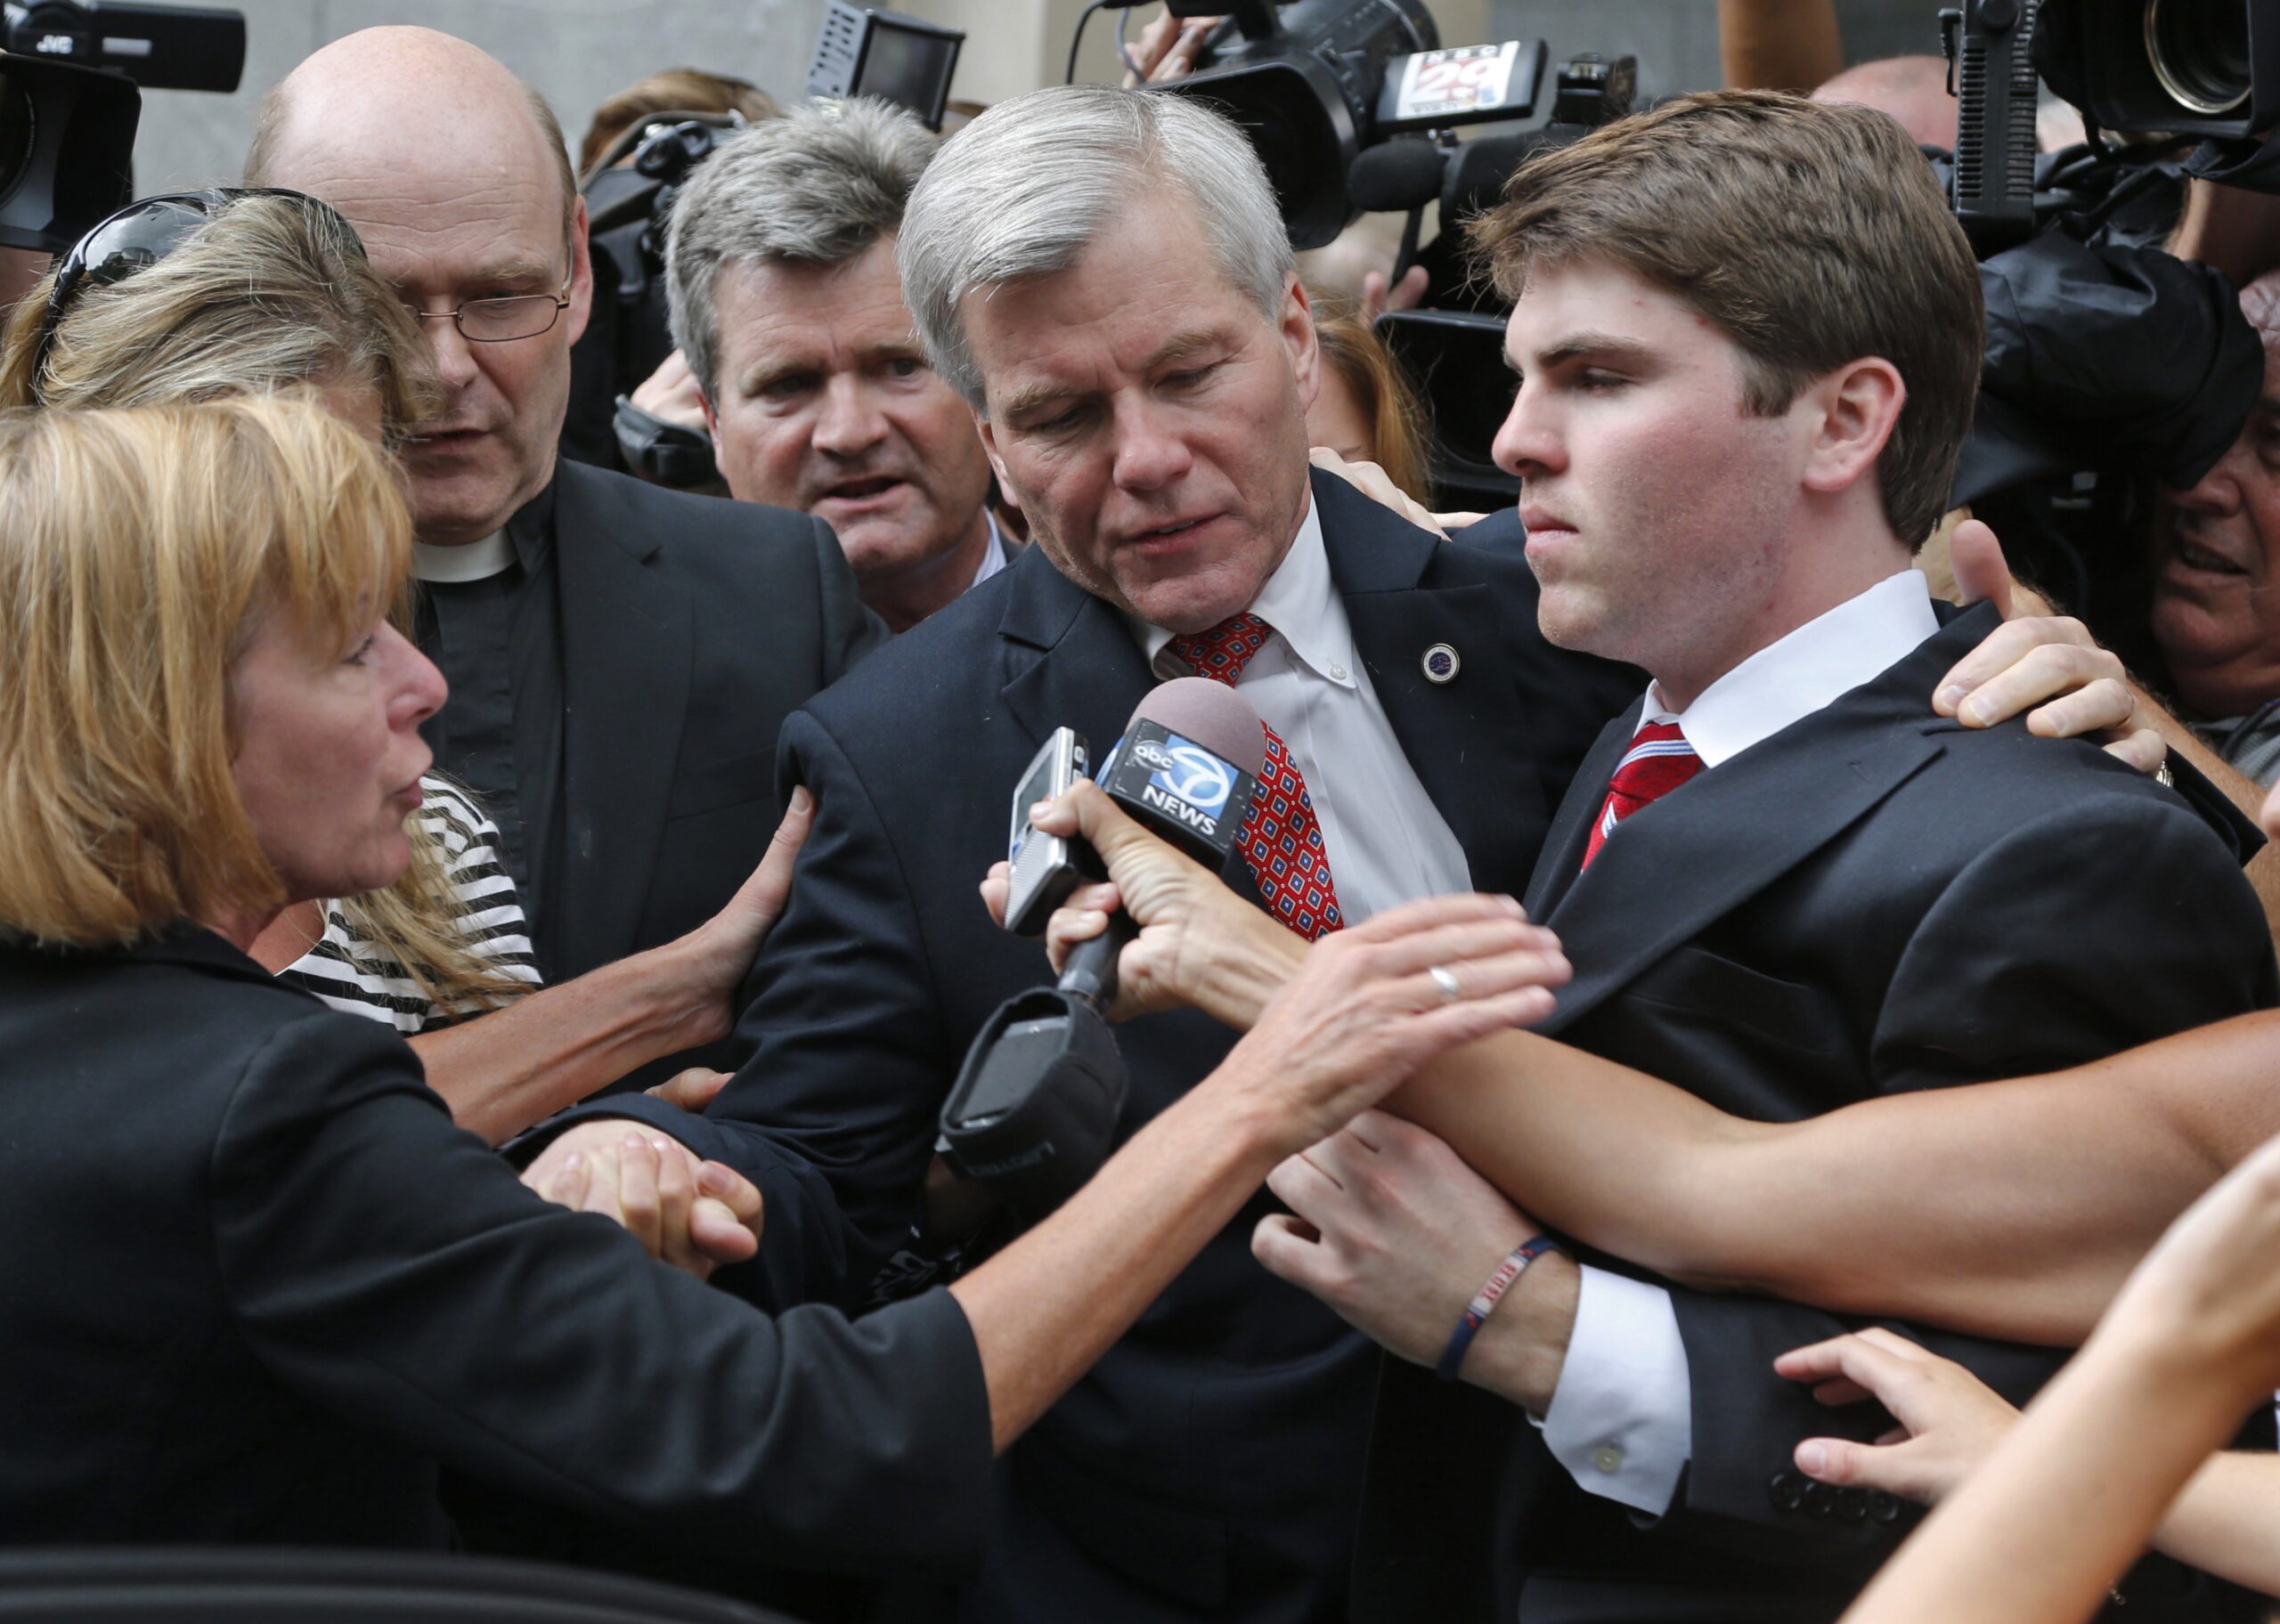 Bob McDonnell is mobbed by media after being convicted on multiple counts of corruption in Virginia.